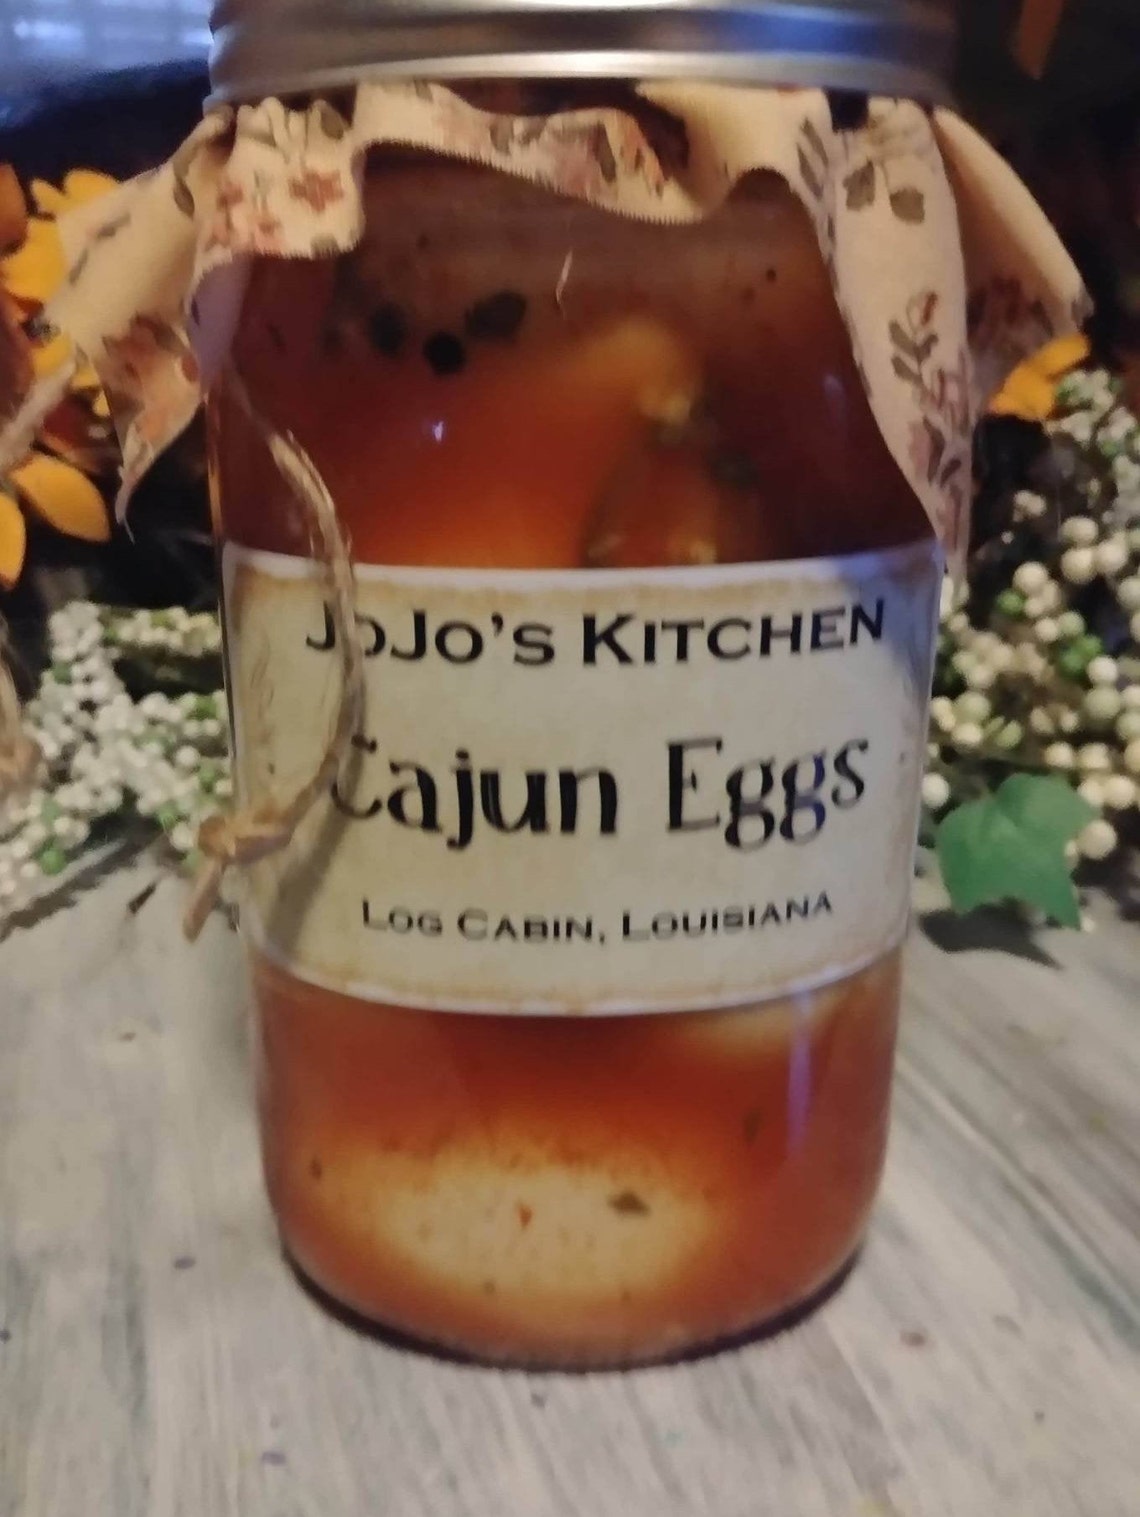 Pickled Eggs spicy cajun eggs fresh spicy flavored pickled | Etsy